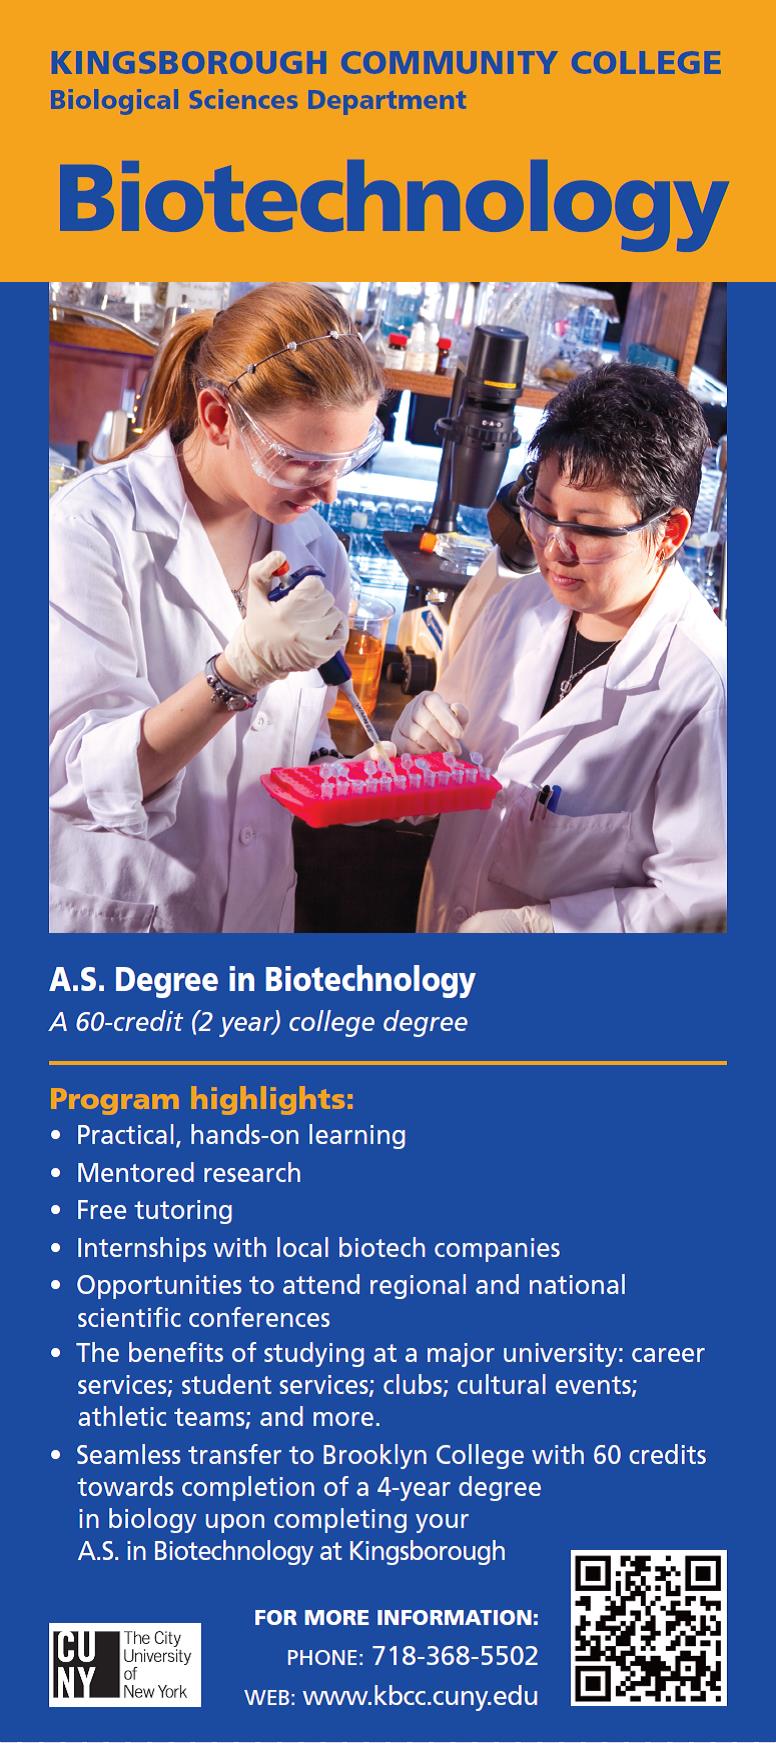 A.S. Degree in Biotechnology